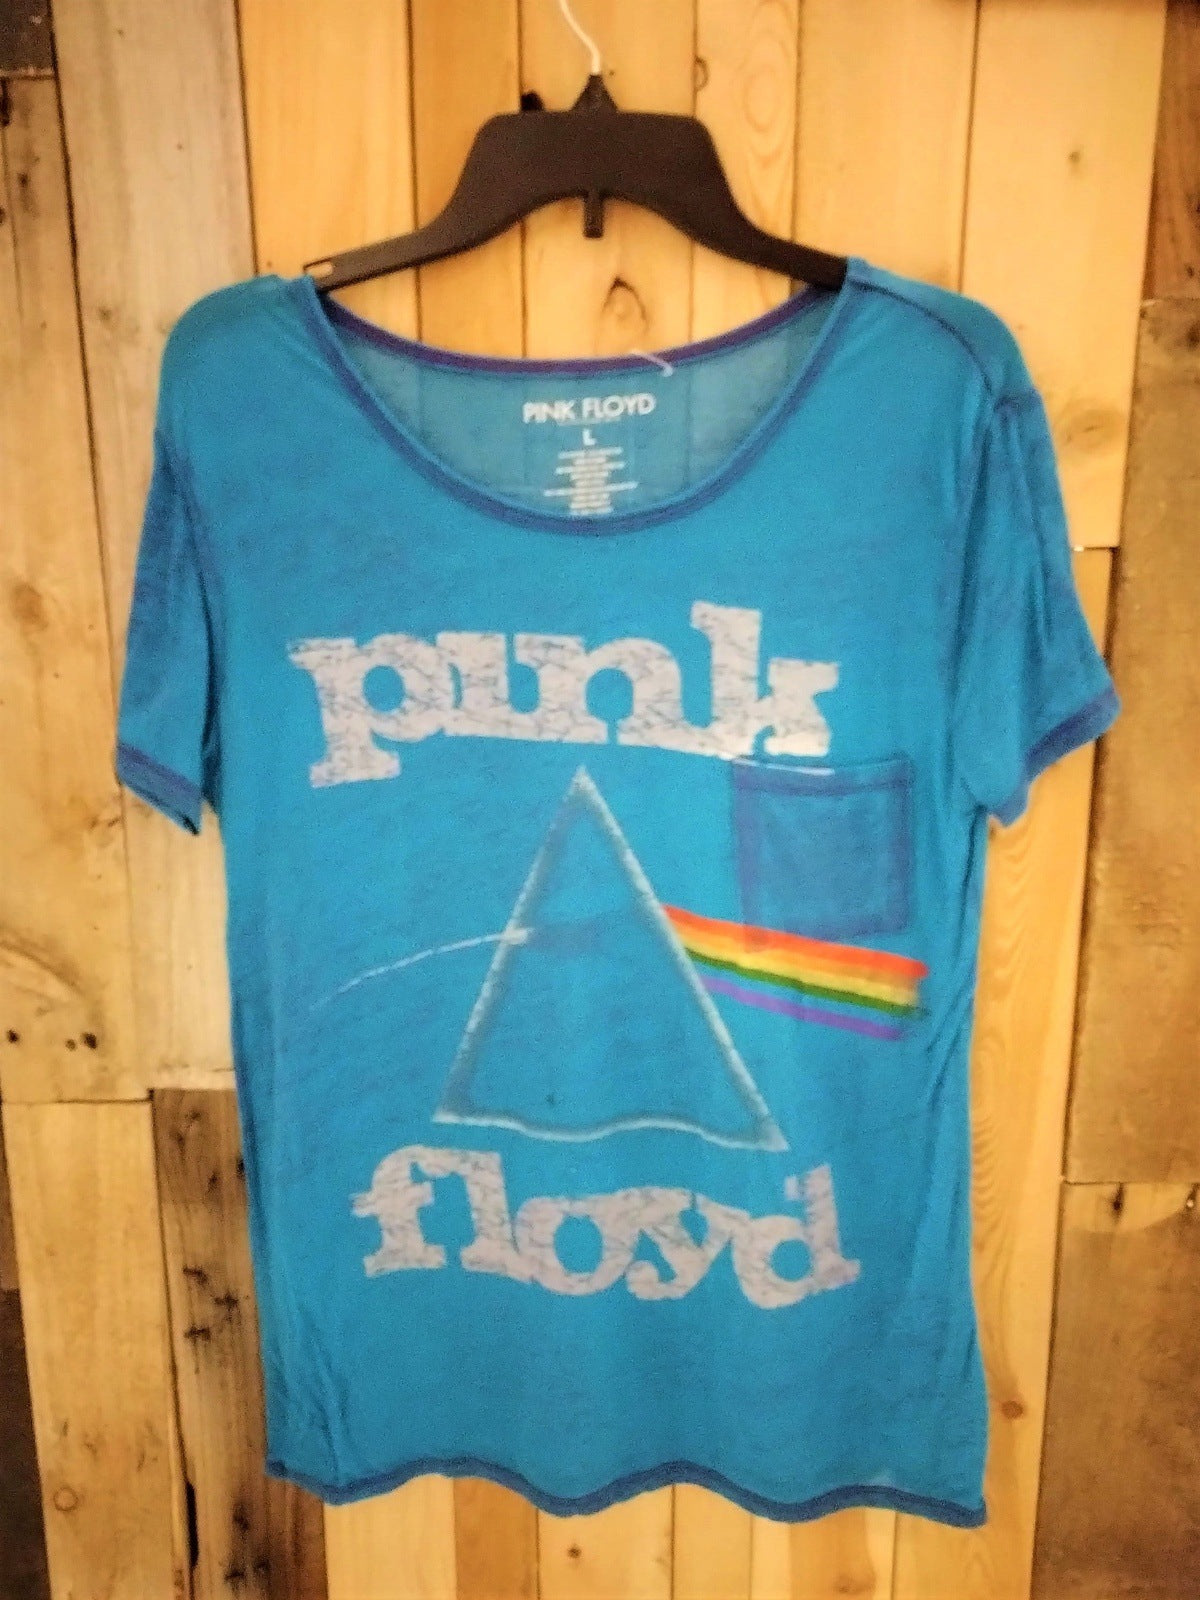 Pink Floyd Official Merchandise Women's Semi Sheer T Shirt Size Large 647815WH